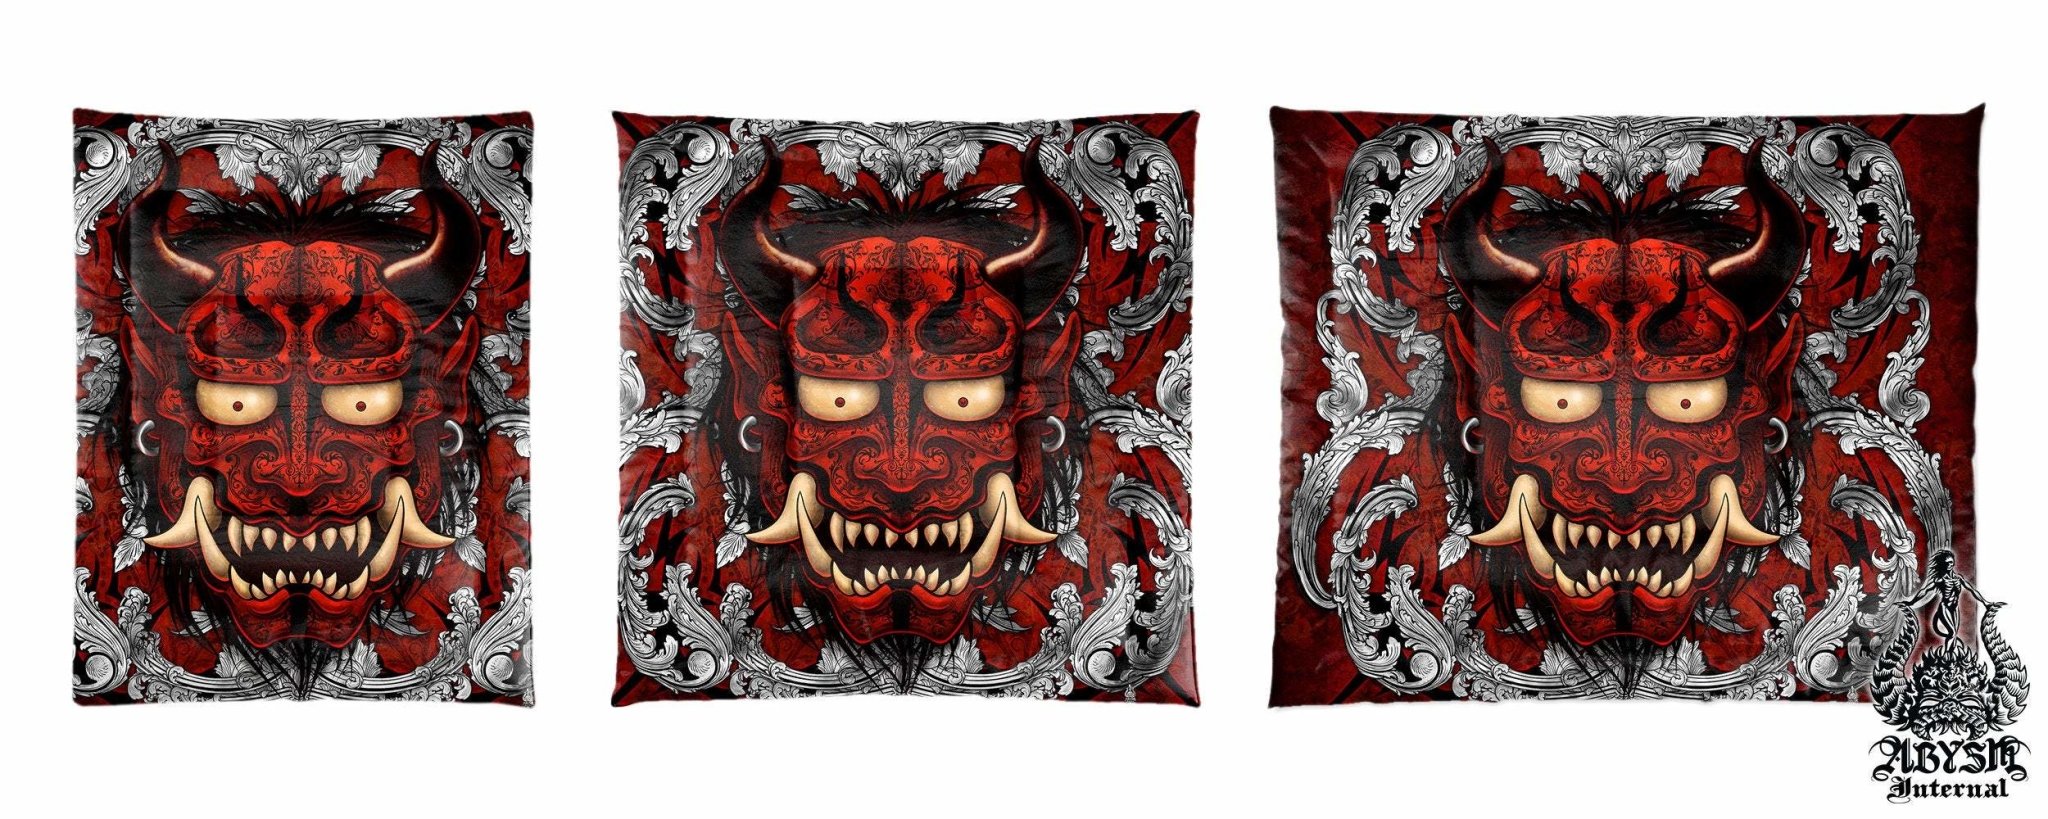 Oni Bedding Set, Comforter and Duvet, Anime Bed Cover, Alternative Bedroom Decor, King, Queen and Twin Size - Silver & Red, Japanese Demon - Abysm Internal